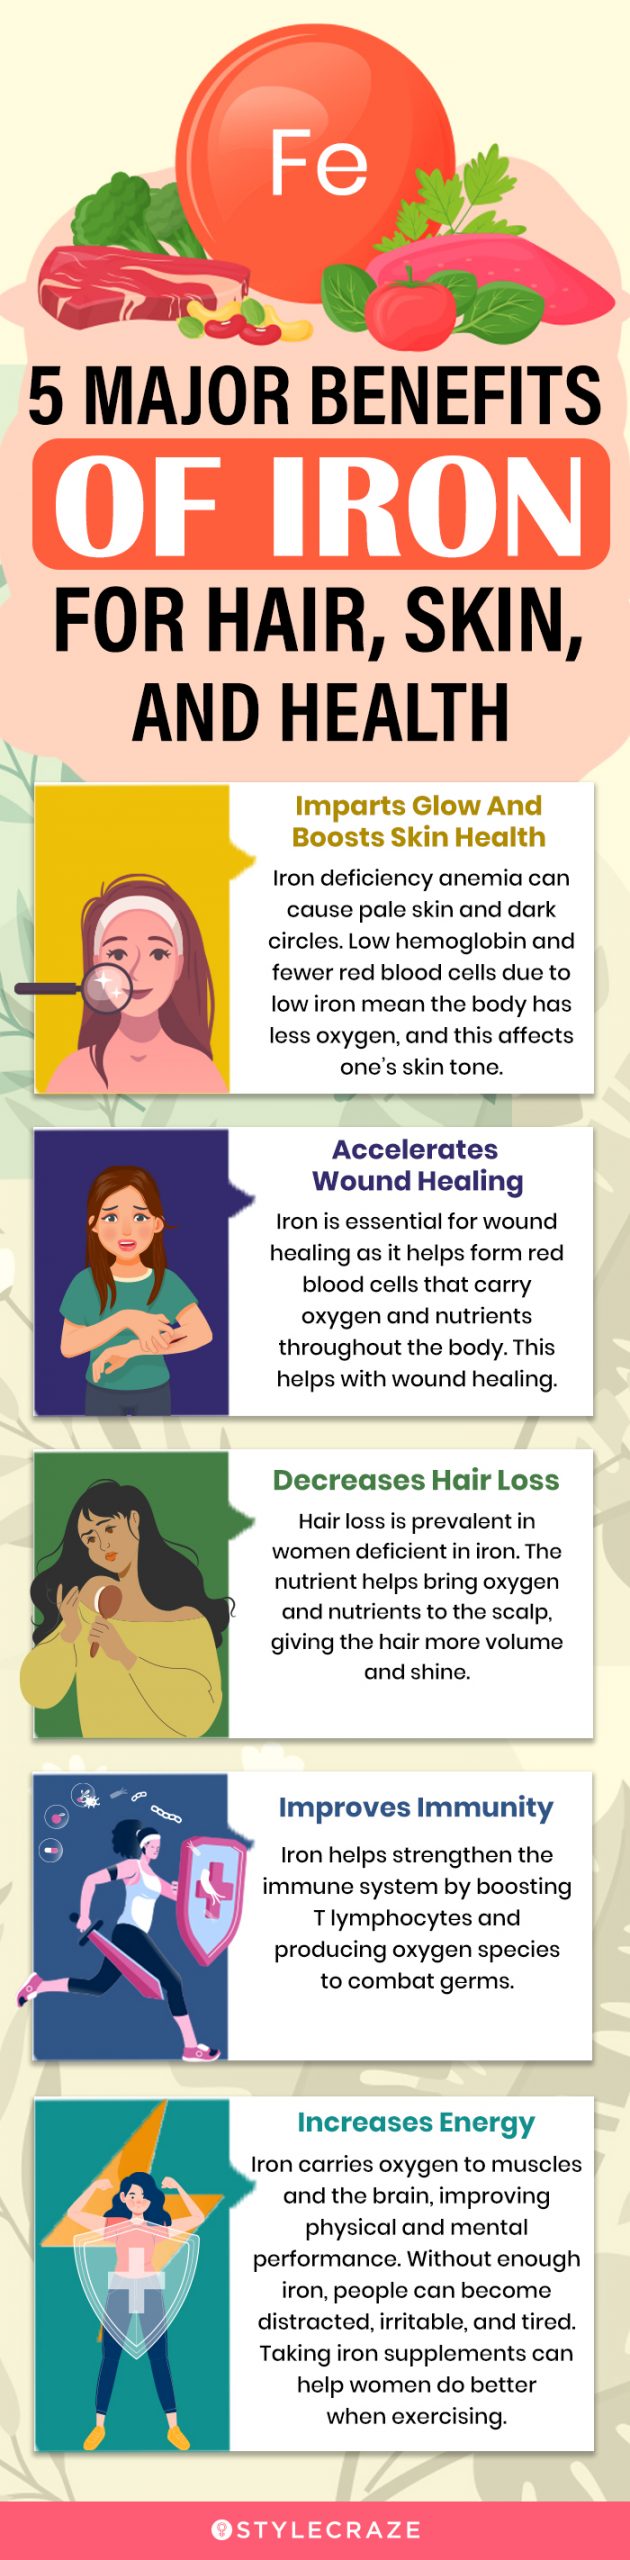 5 major benefits of iron for hair skin and health (infographic)